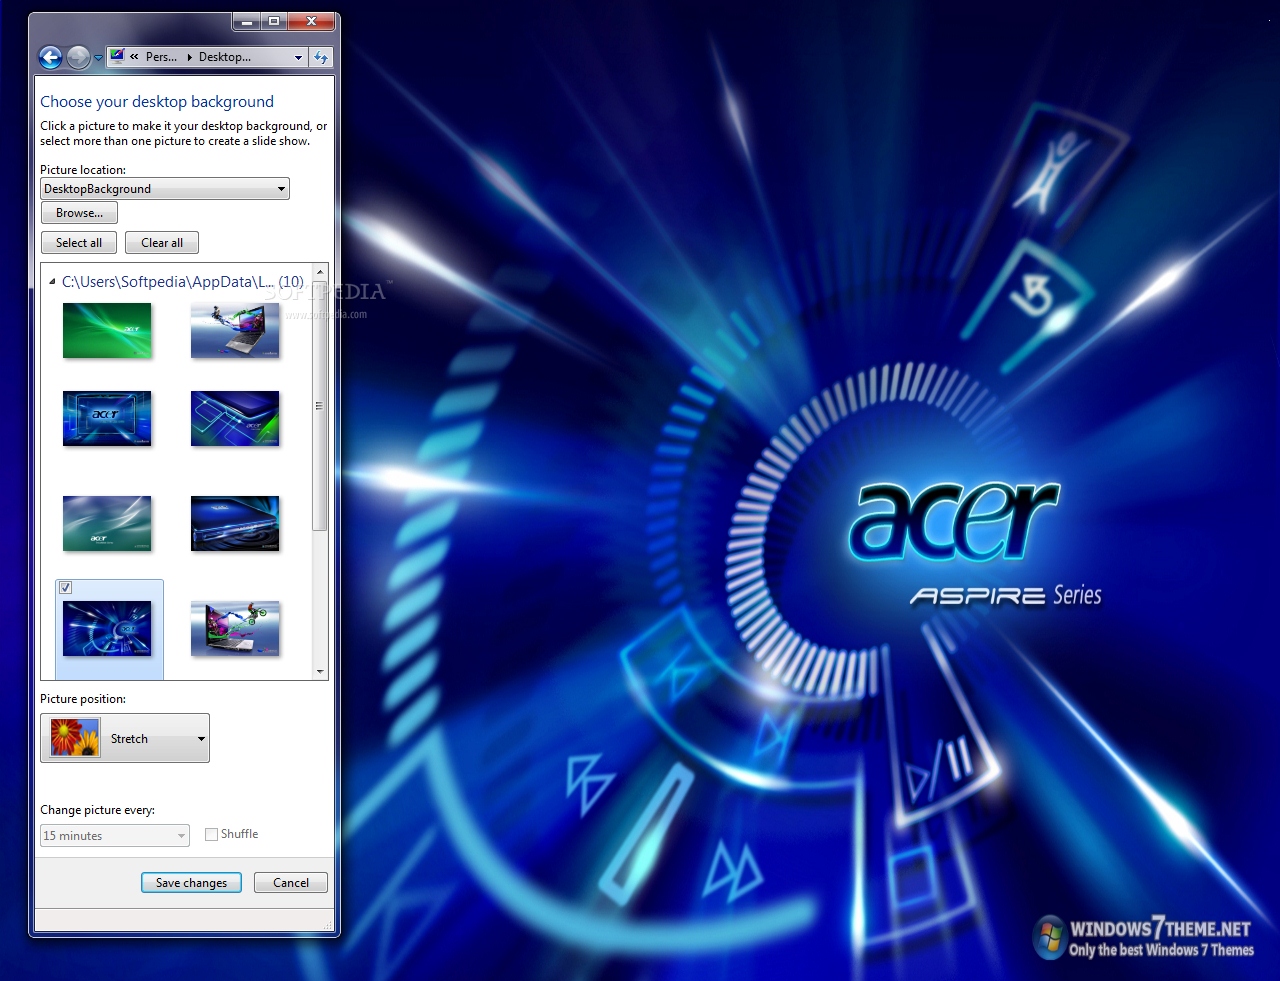 Acer Windows Theme This Is A Sample From What Pack Will